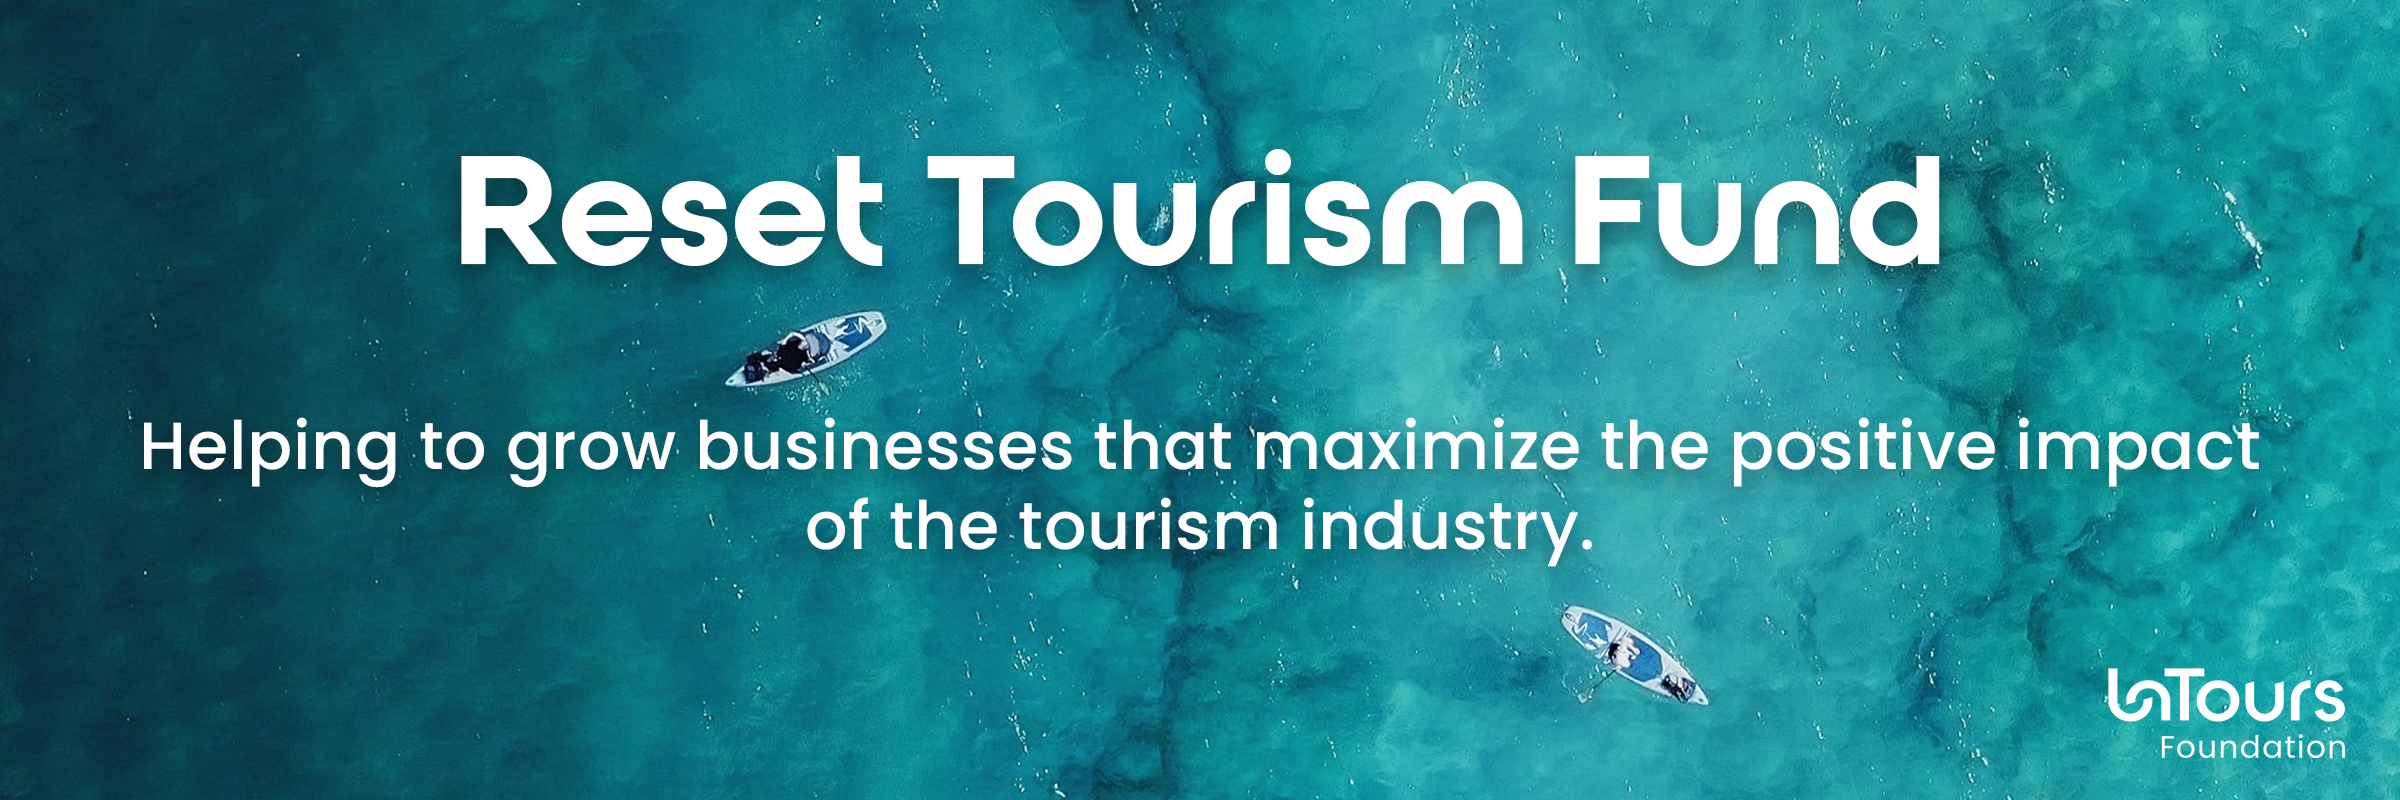 BANNER: Reset Tourism Fund - Helping to grow businesses that maximize the positive impact of the tourism industry.